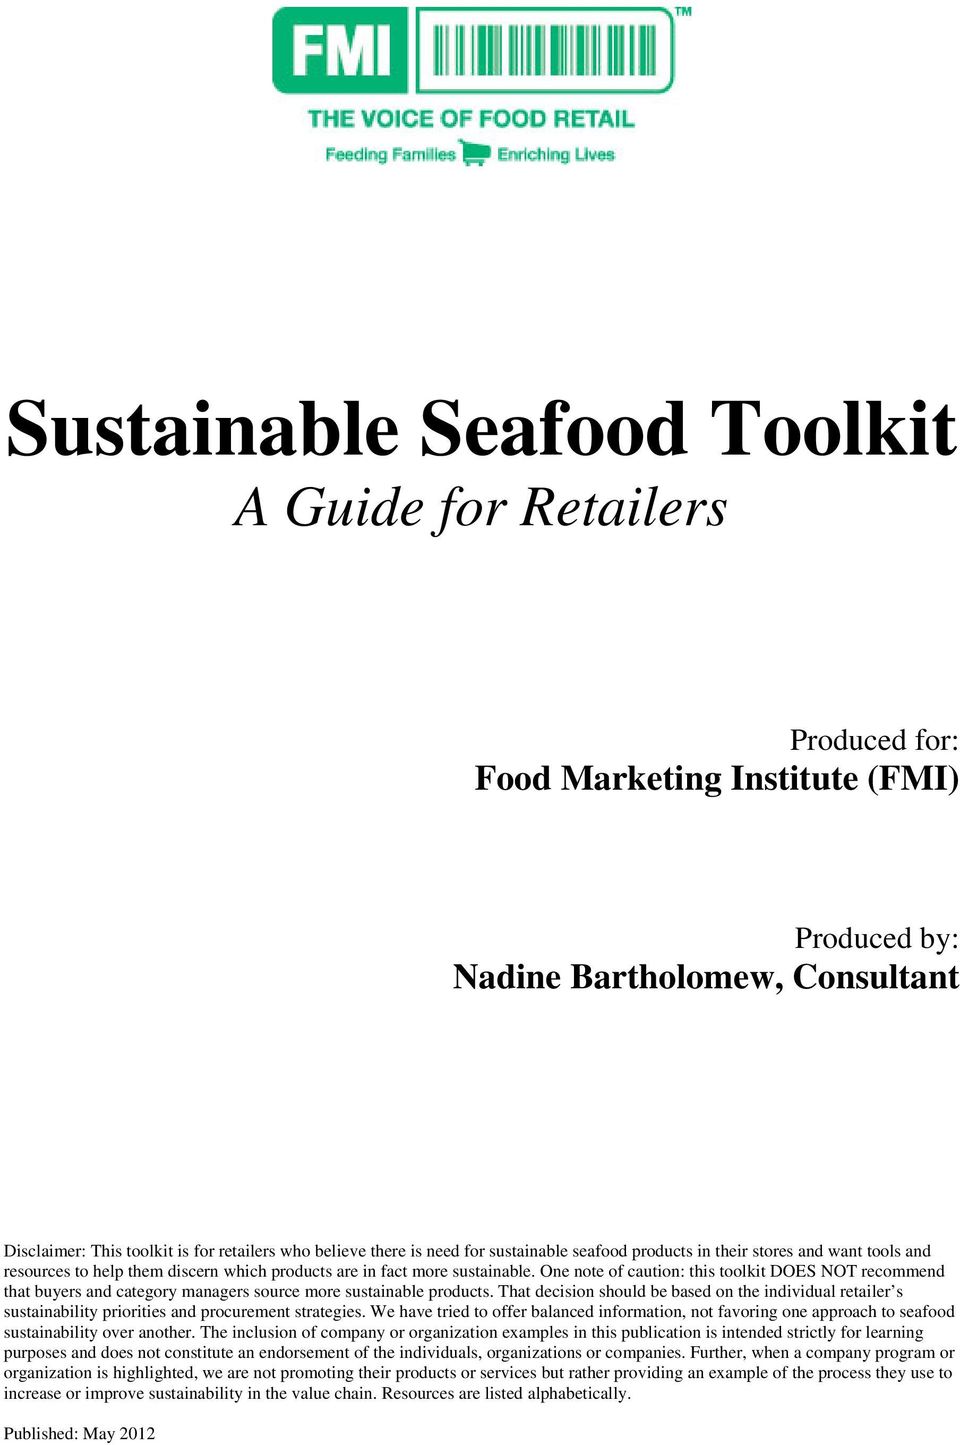 One note of caution: this toolkit DOES NOT recommend that buyers and category managers source more sustainable products.